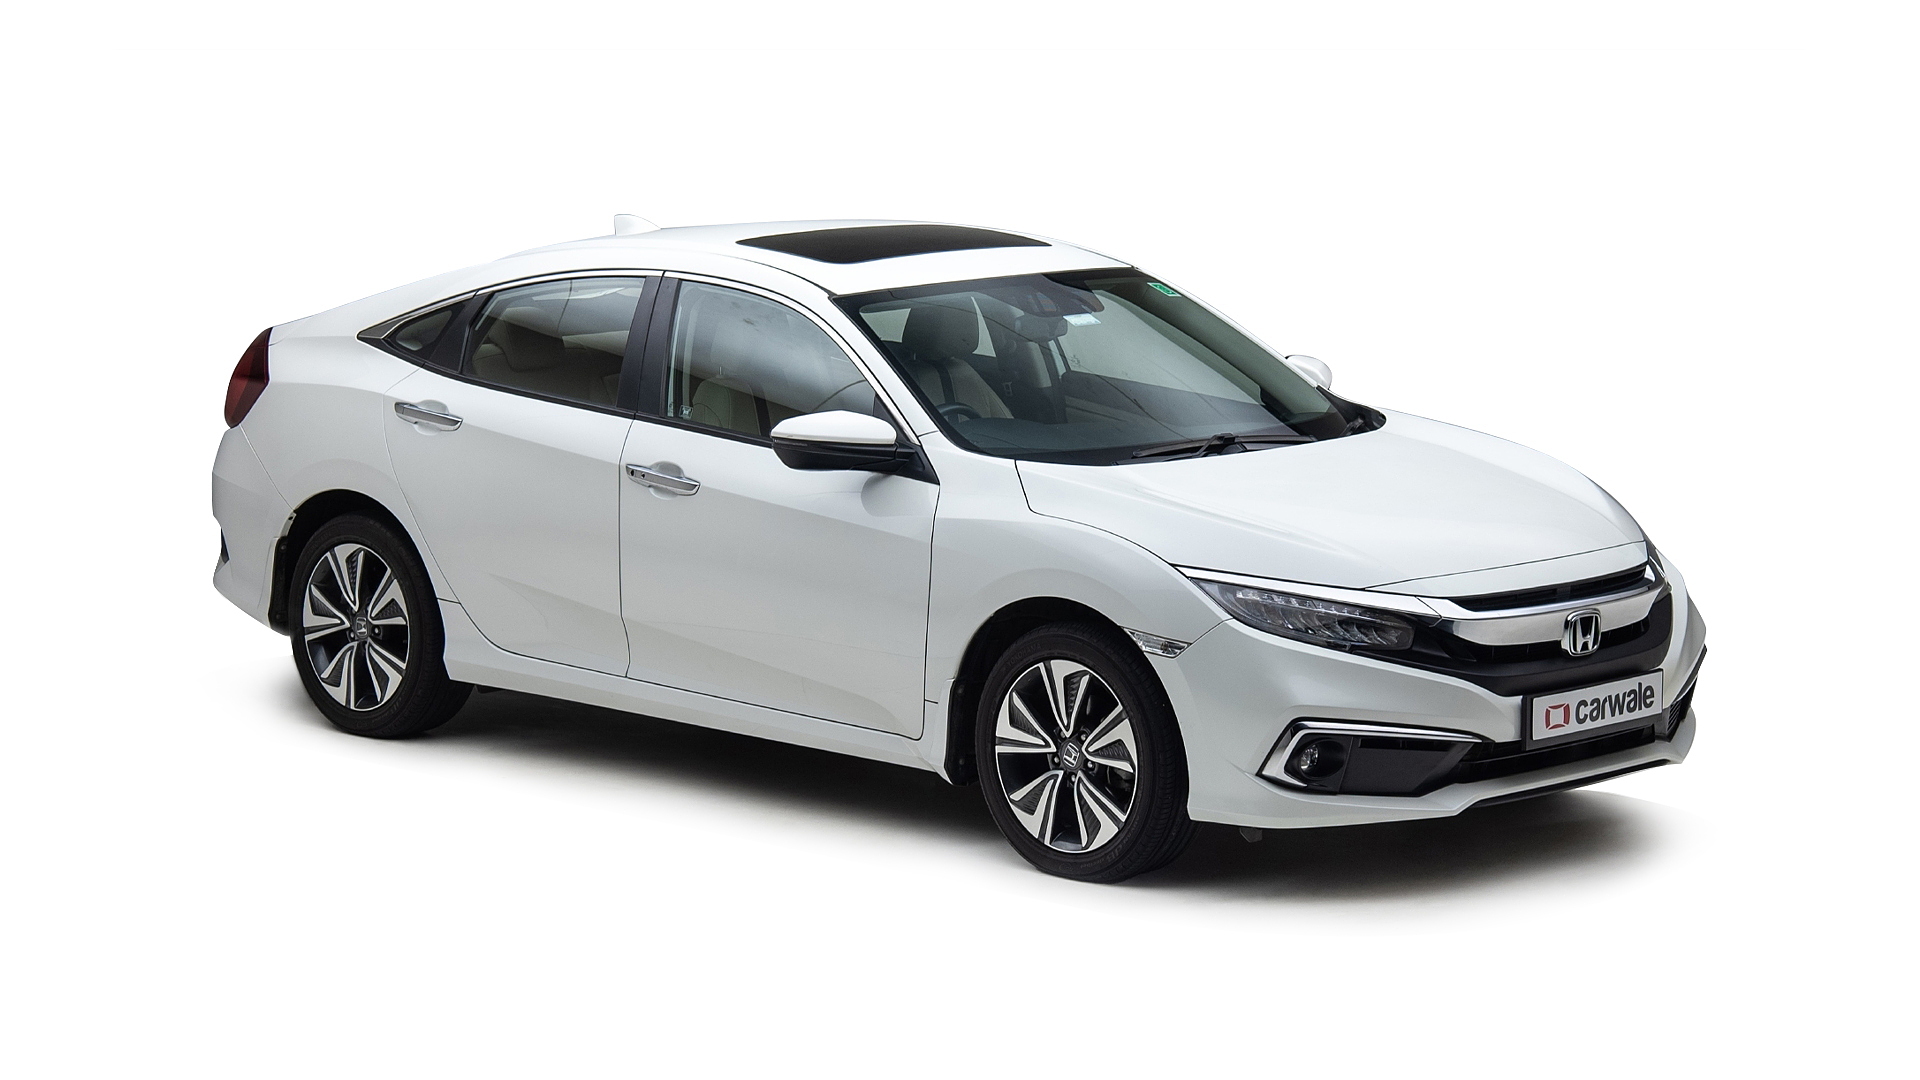 Honda Civic Vx Cvt Petrol Price In India Features Specs And Reviews Carwale